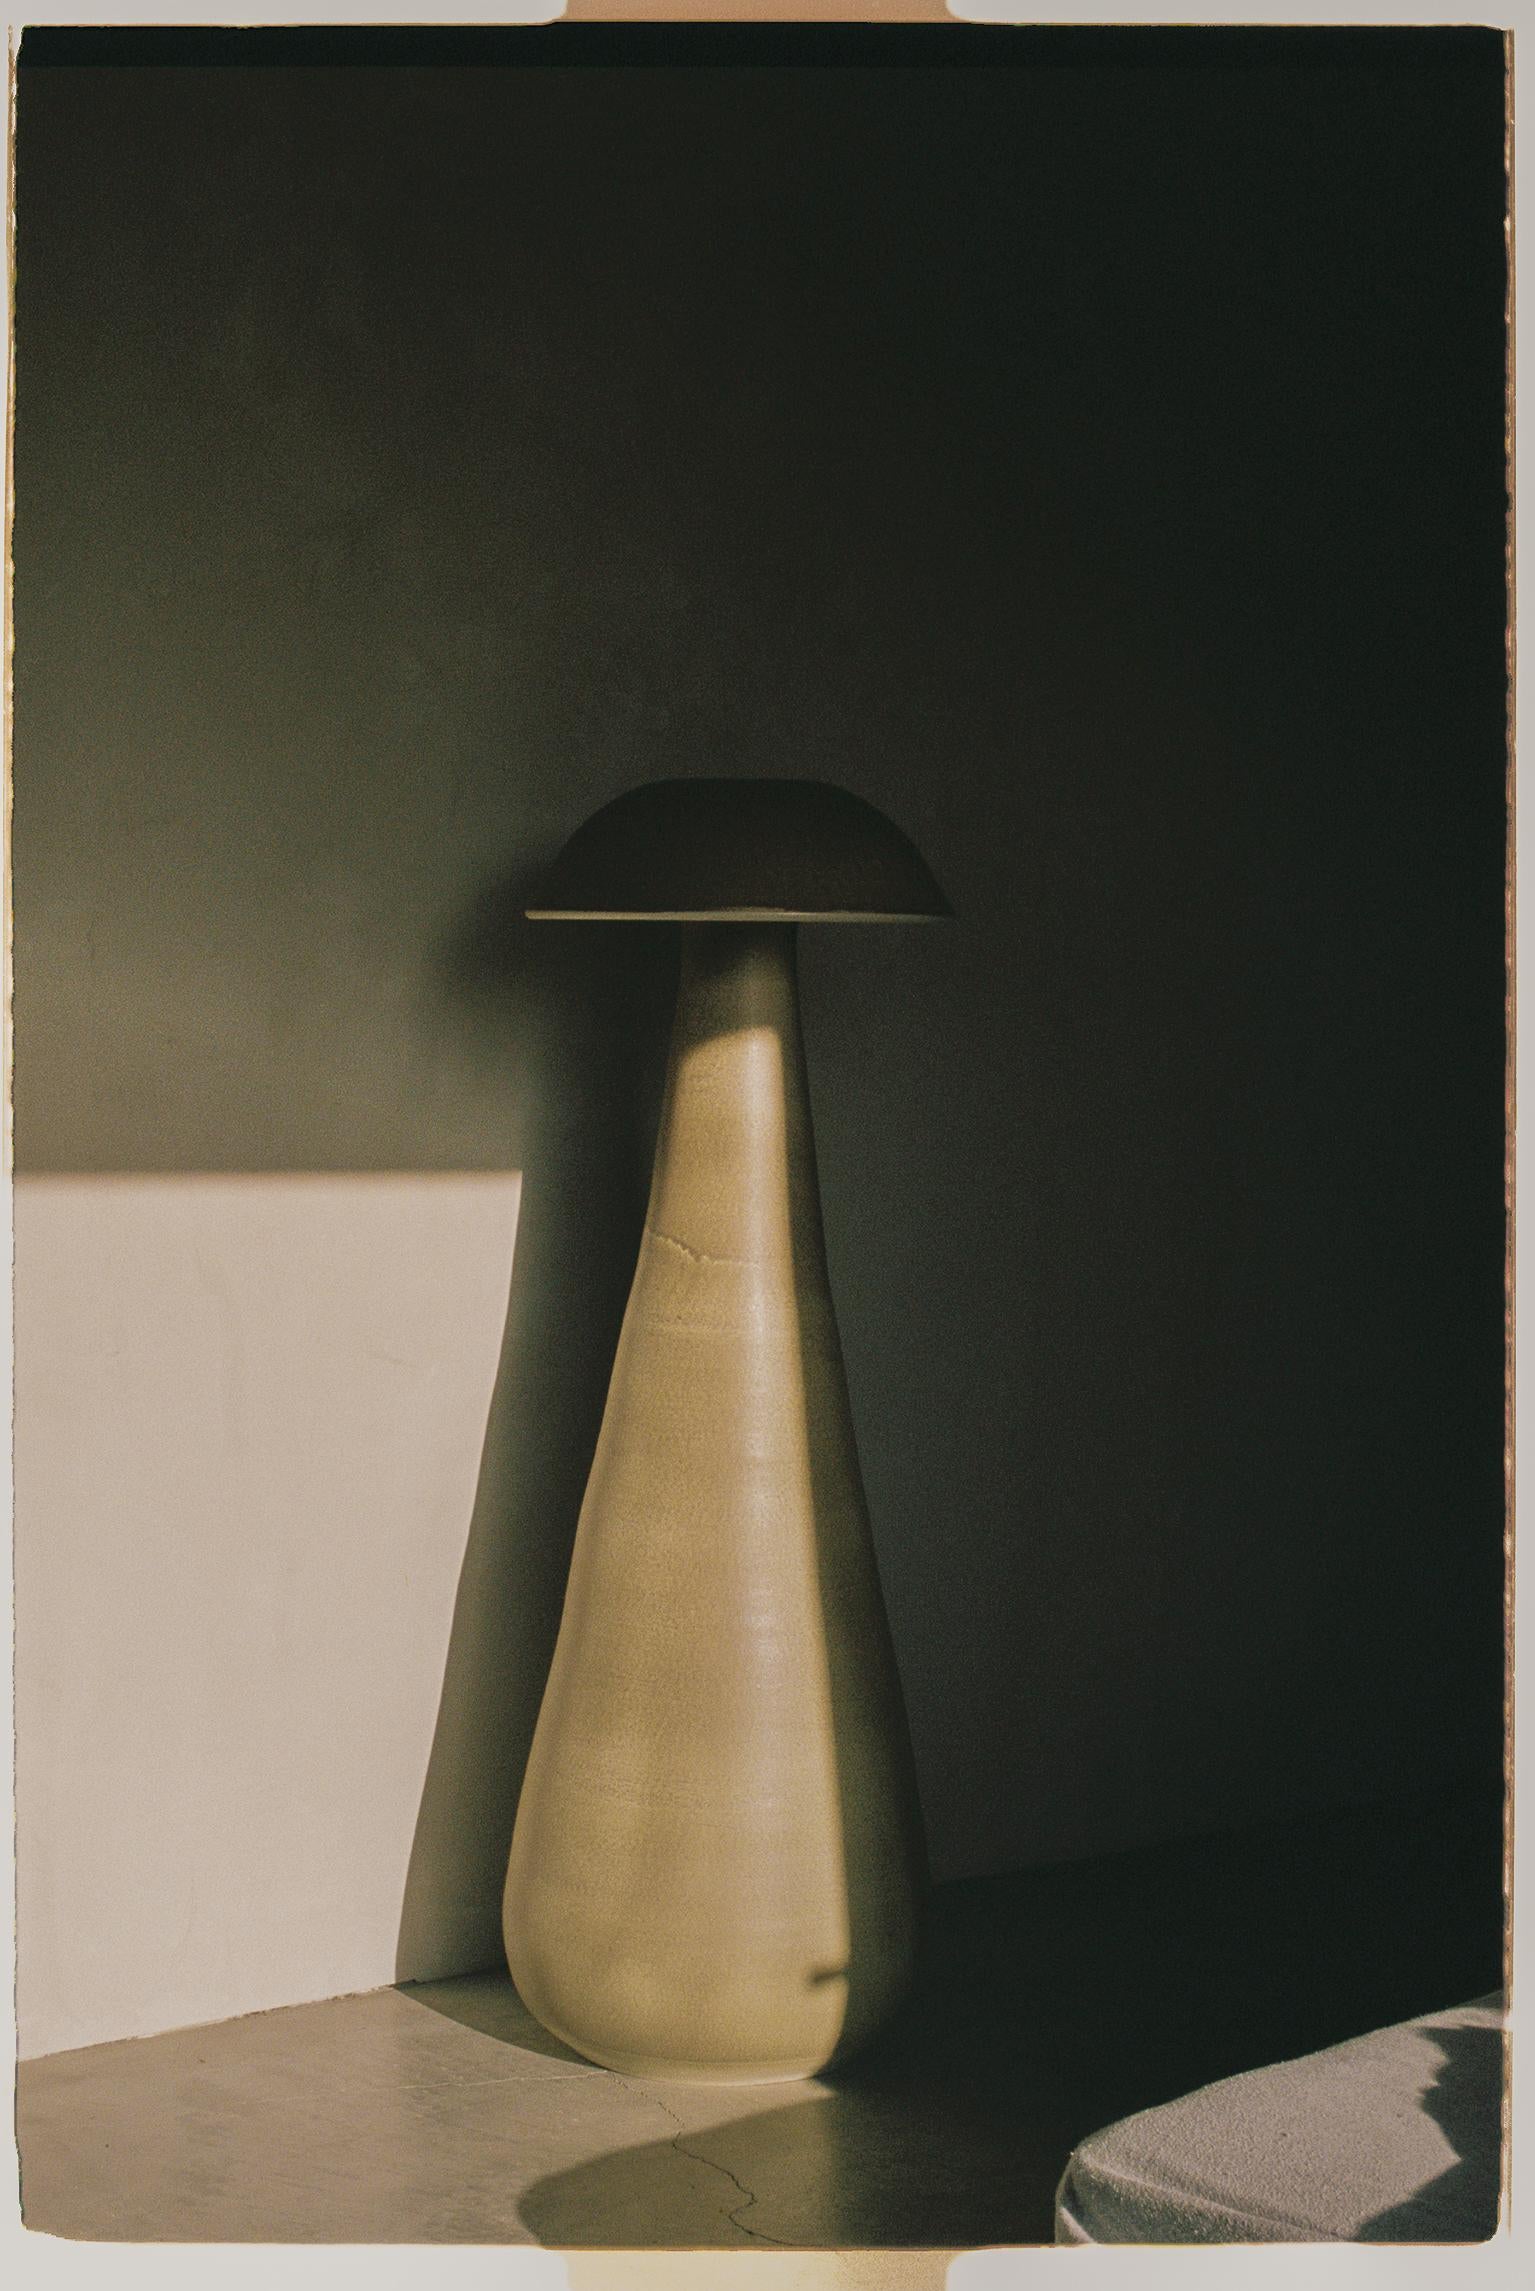 Fern Green Glaze Satin Mushroom floor lamp by Nick Pourfard
Dimensions: Ø 51 x H 122 cm.
Materials: ceramic.
Different finishes available. 

All our lamps can be wired according to each country. If sold to the USA it will be wired for the USA